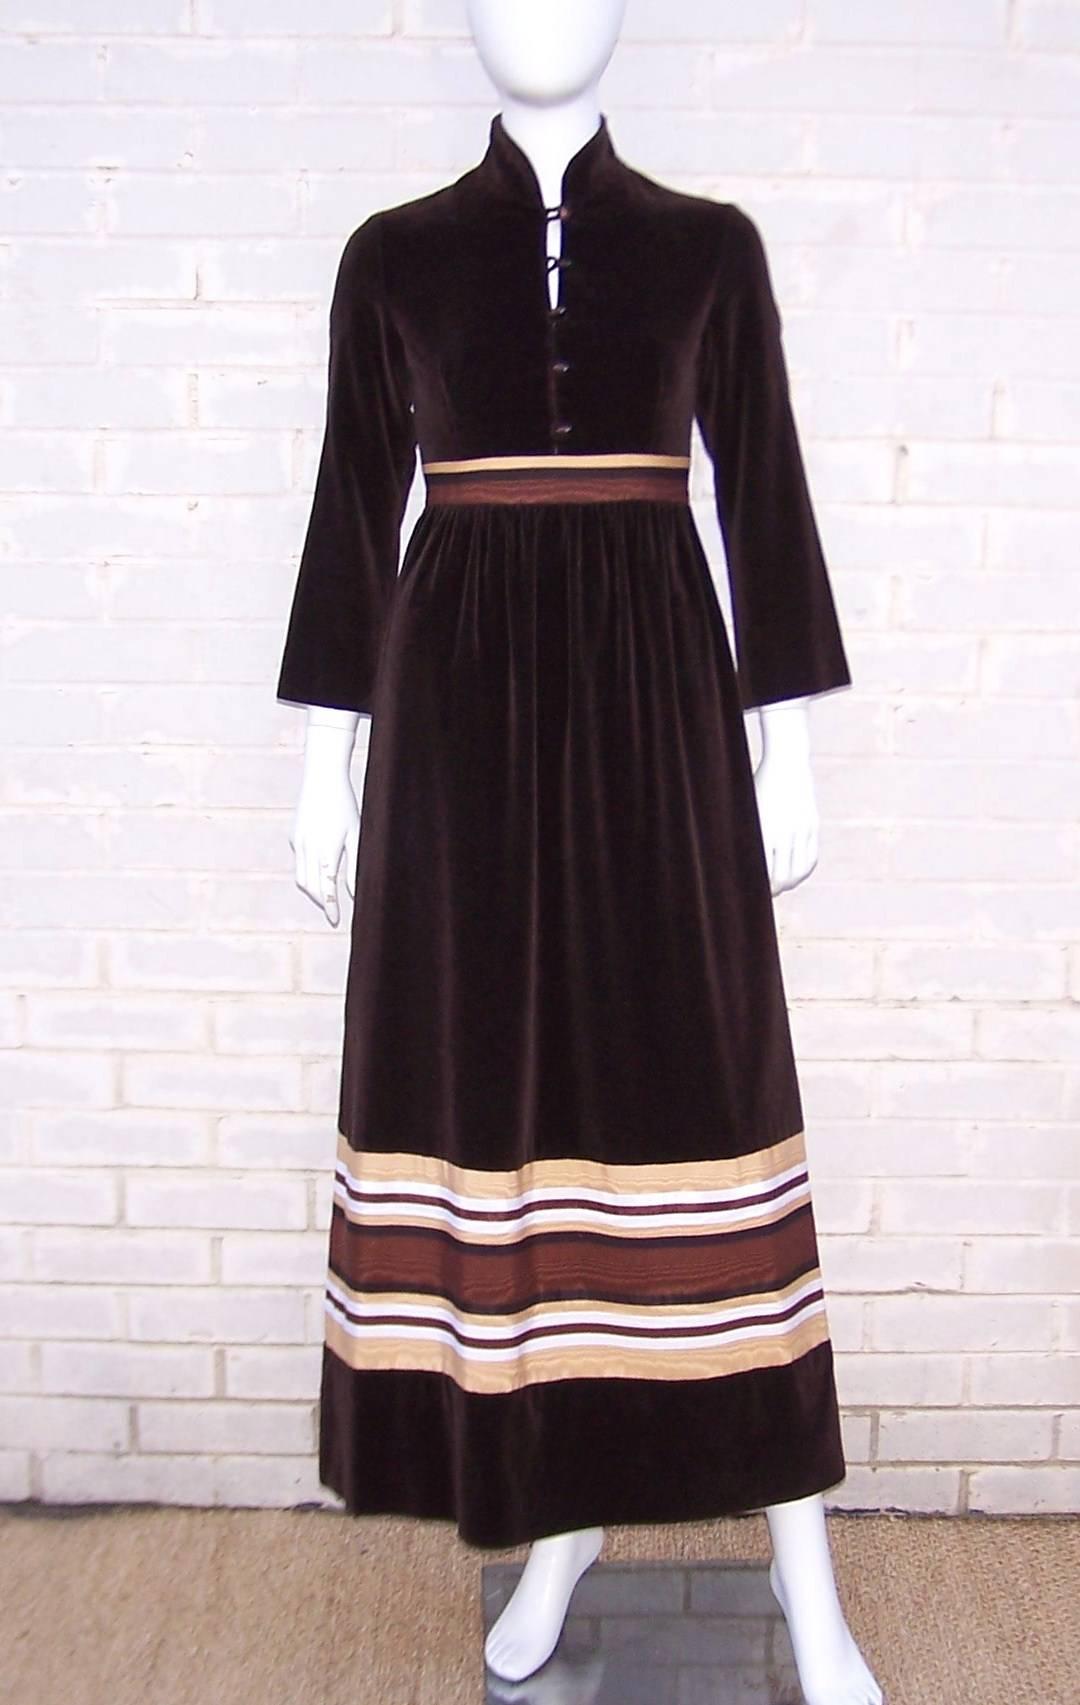 Kay Unger lent her ladylike aesthetics to the A.J. Bari label during the 1970's and this lovely little dress is an example of her work.  The chocolate brown velveteen is graphically enhanced with a tricolor moire fabric at the waist and near the